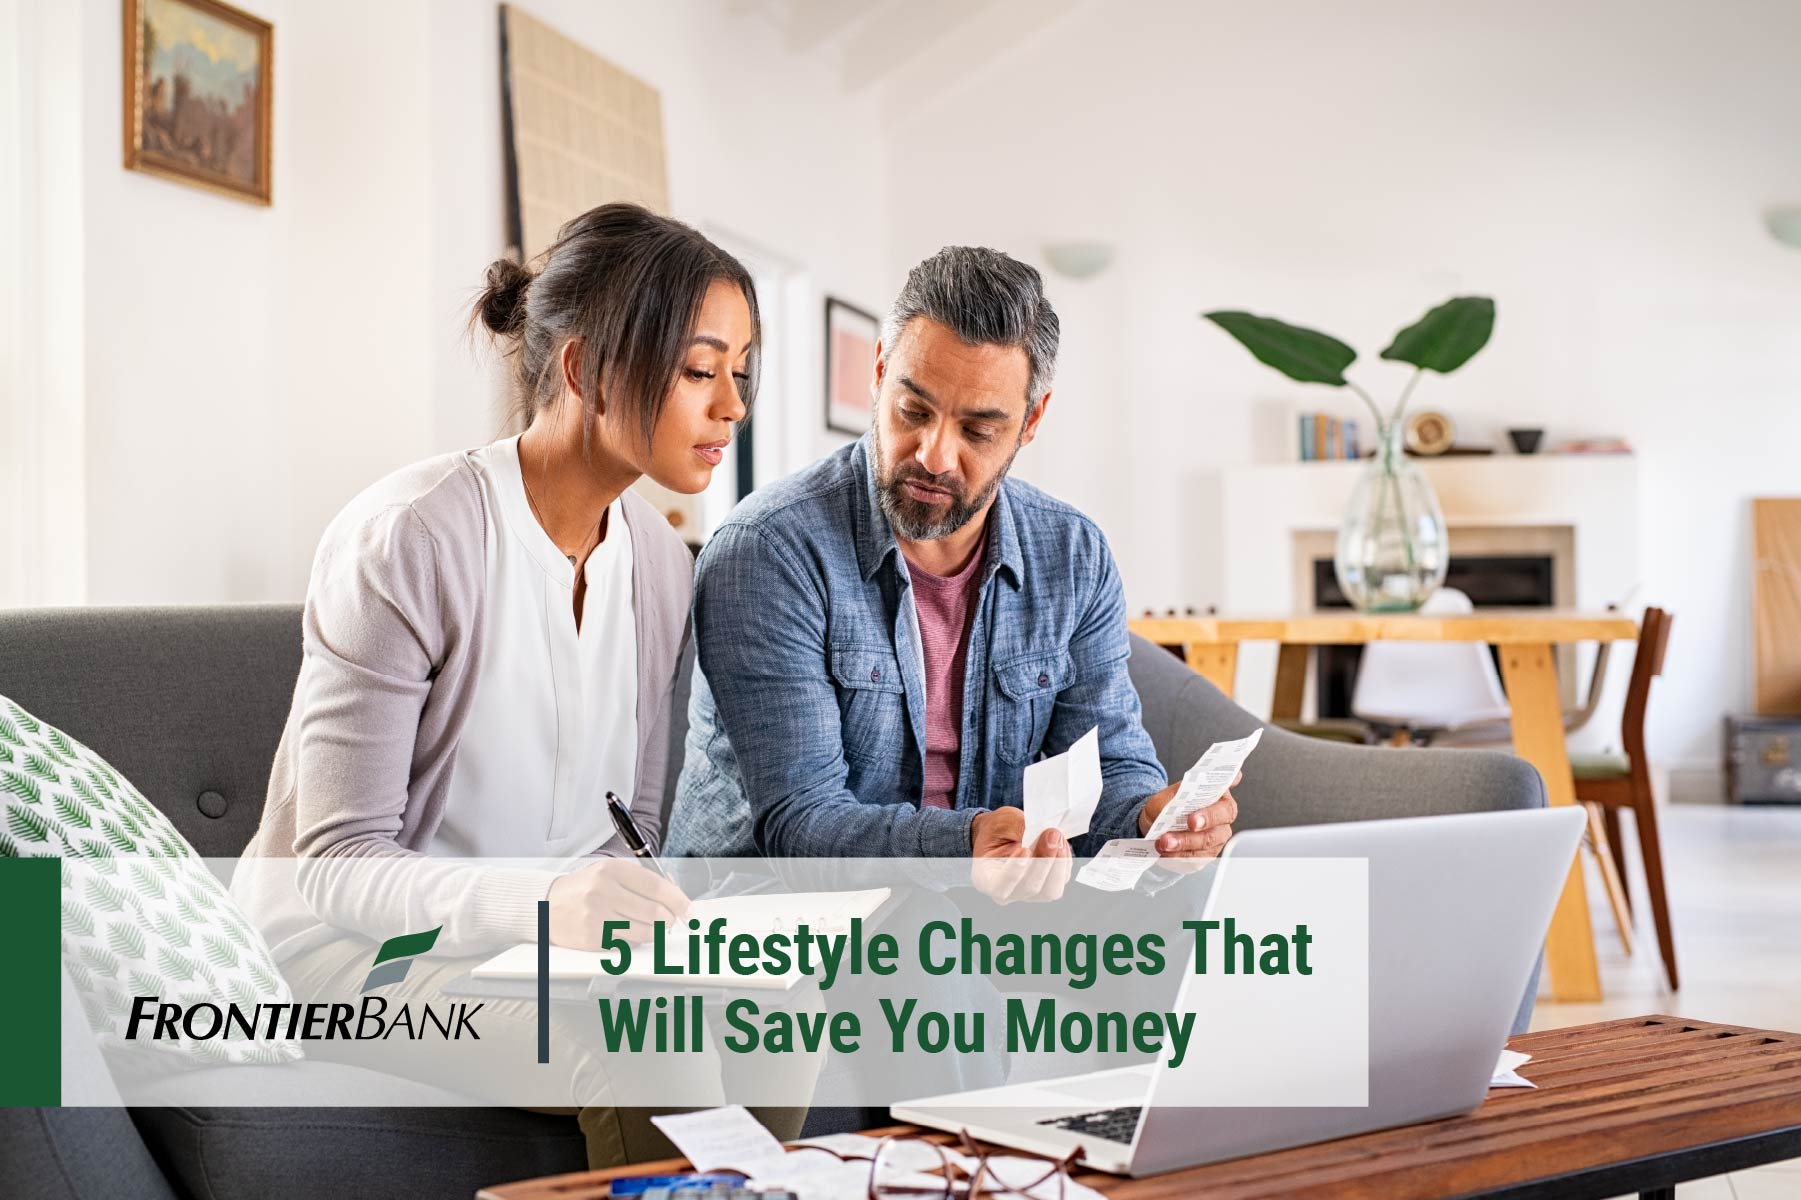 Five lifestyle changes with text #2